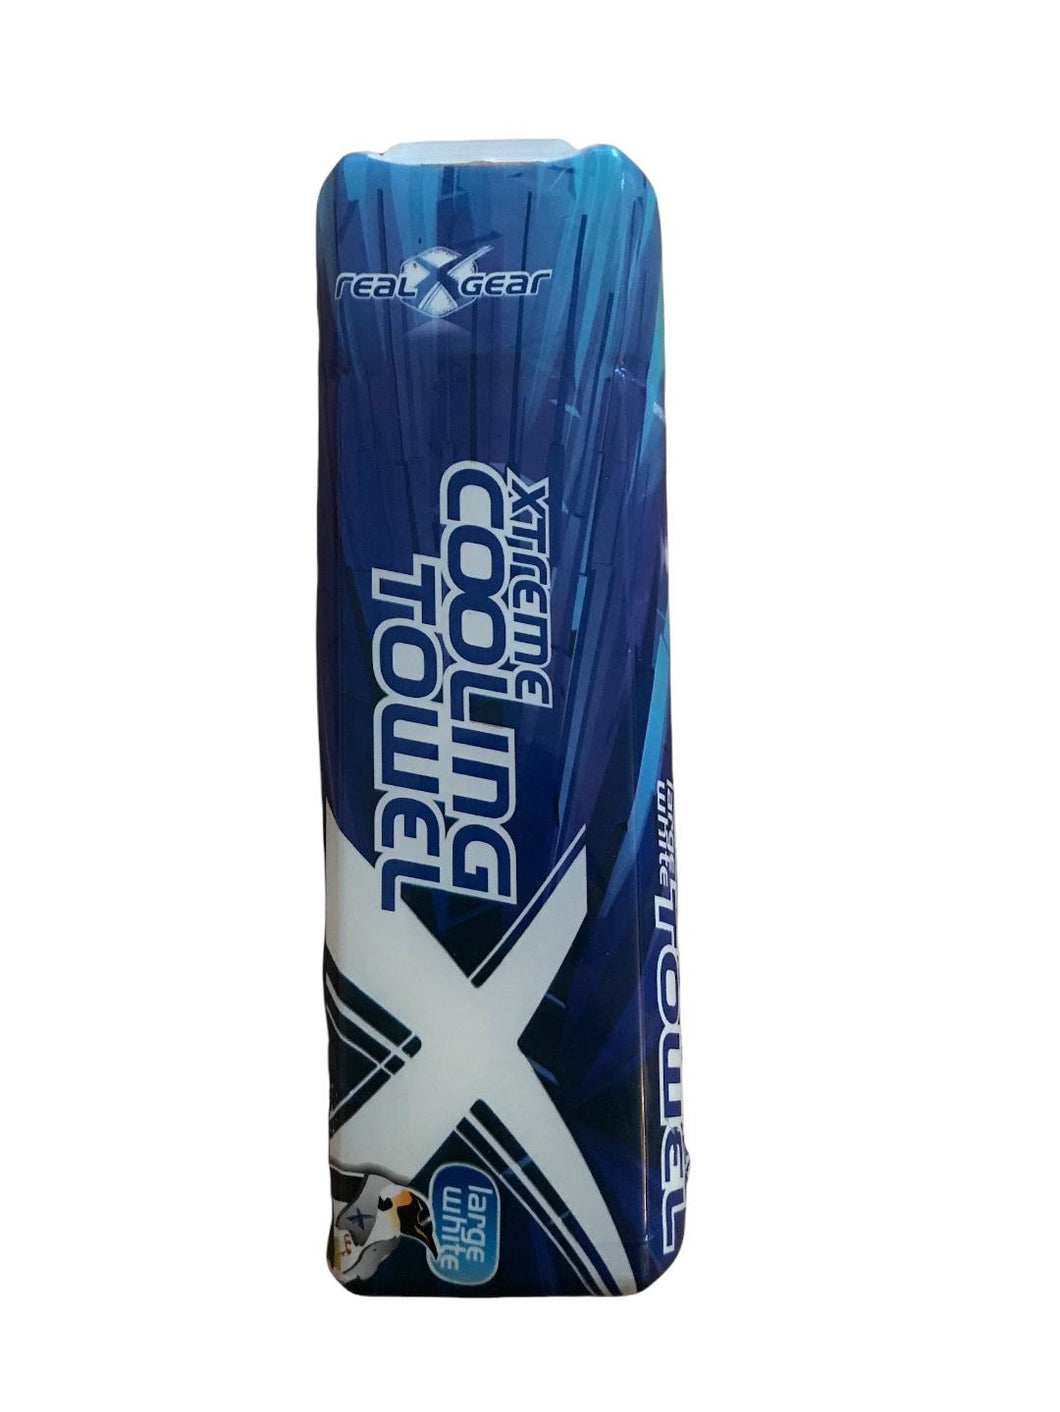 Realgear Xtreme Golf or Sports Cooling Large Towel. Single or Twin Pack. Blue.